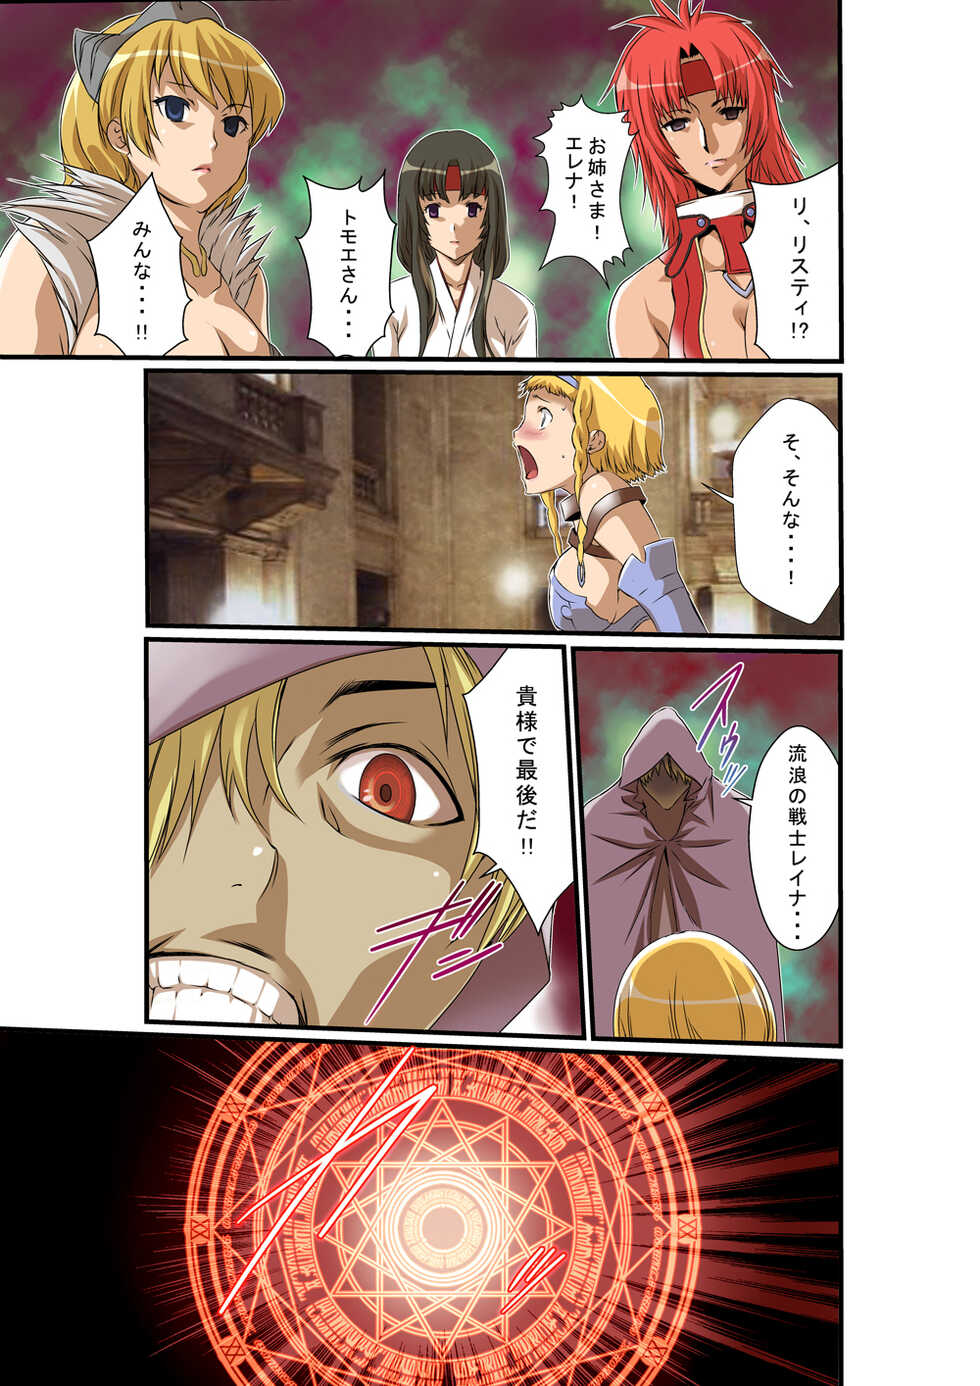 [Utsuro na Hitomi] Queen's *lade Mind-control Manga (Queen's Blade) - Page 21